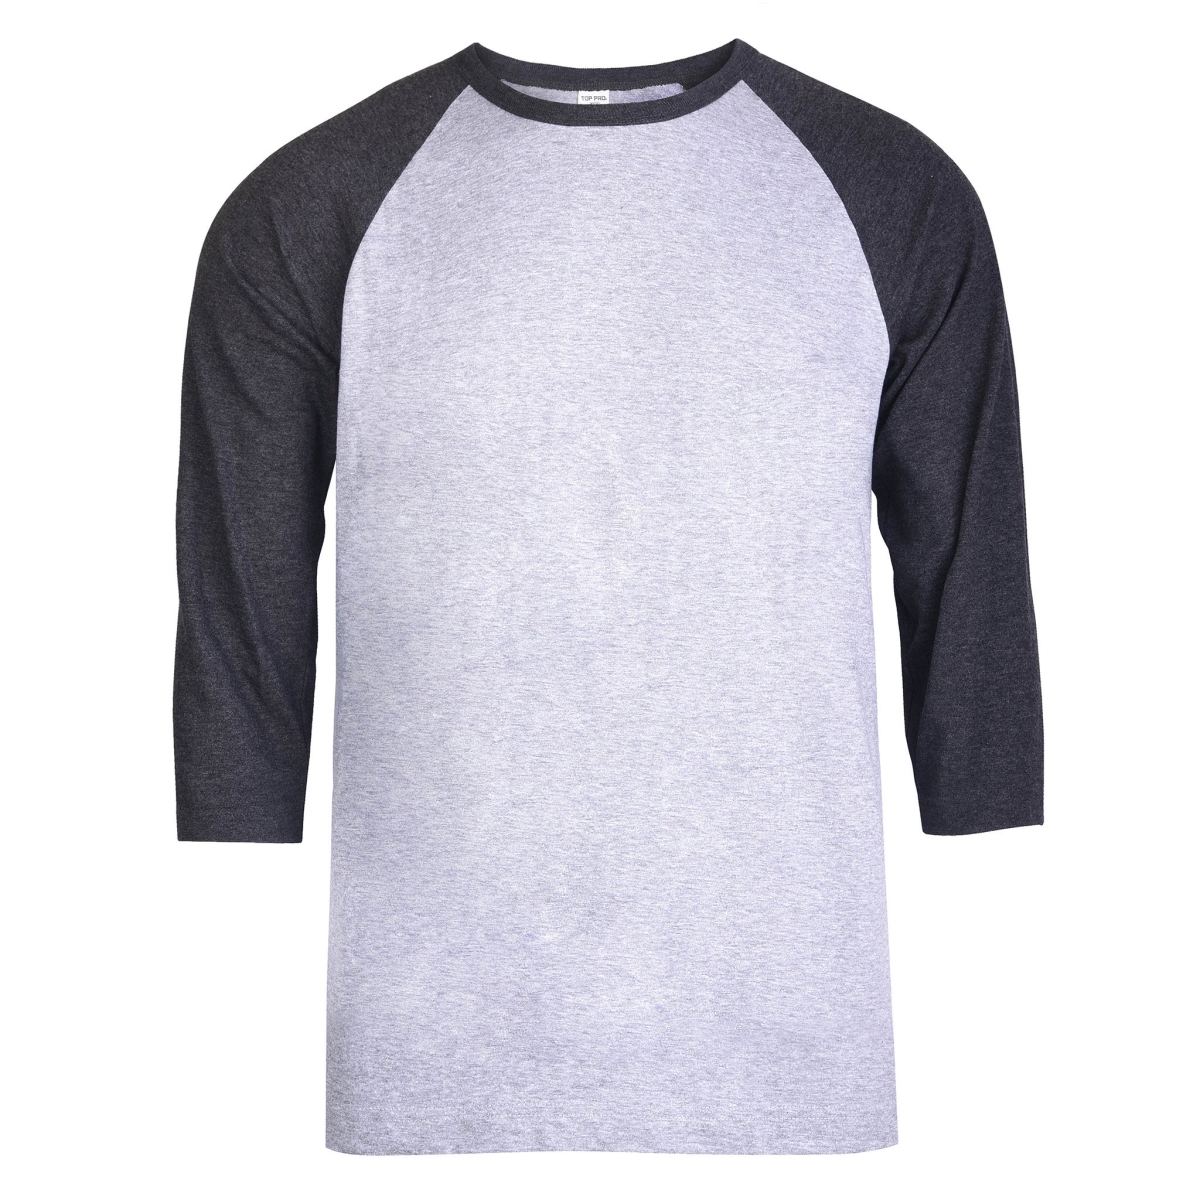 Picture of 247 Frenzy 247-MBT001 CGY-MD Mens Essentials Top Pro 0.75 Sleeve Raglan Baseball T-Shirt&#44; Charcoal & Heather Gray - Medium